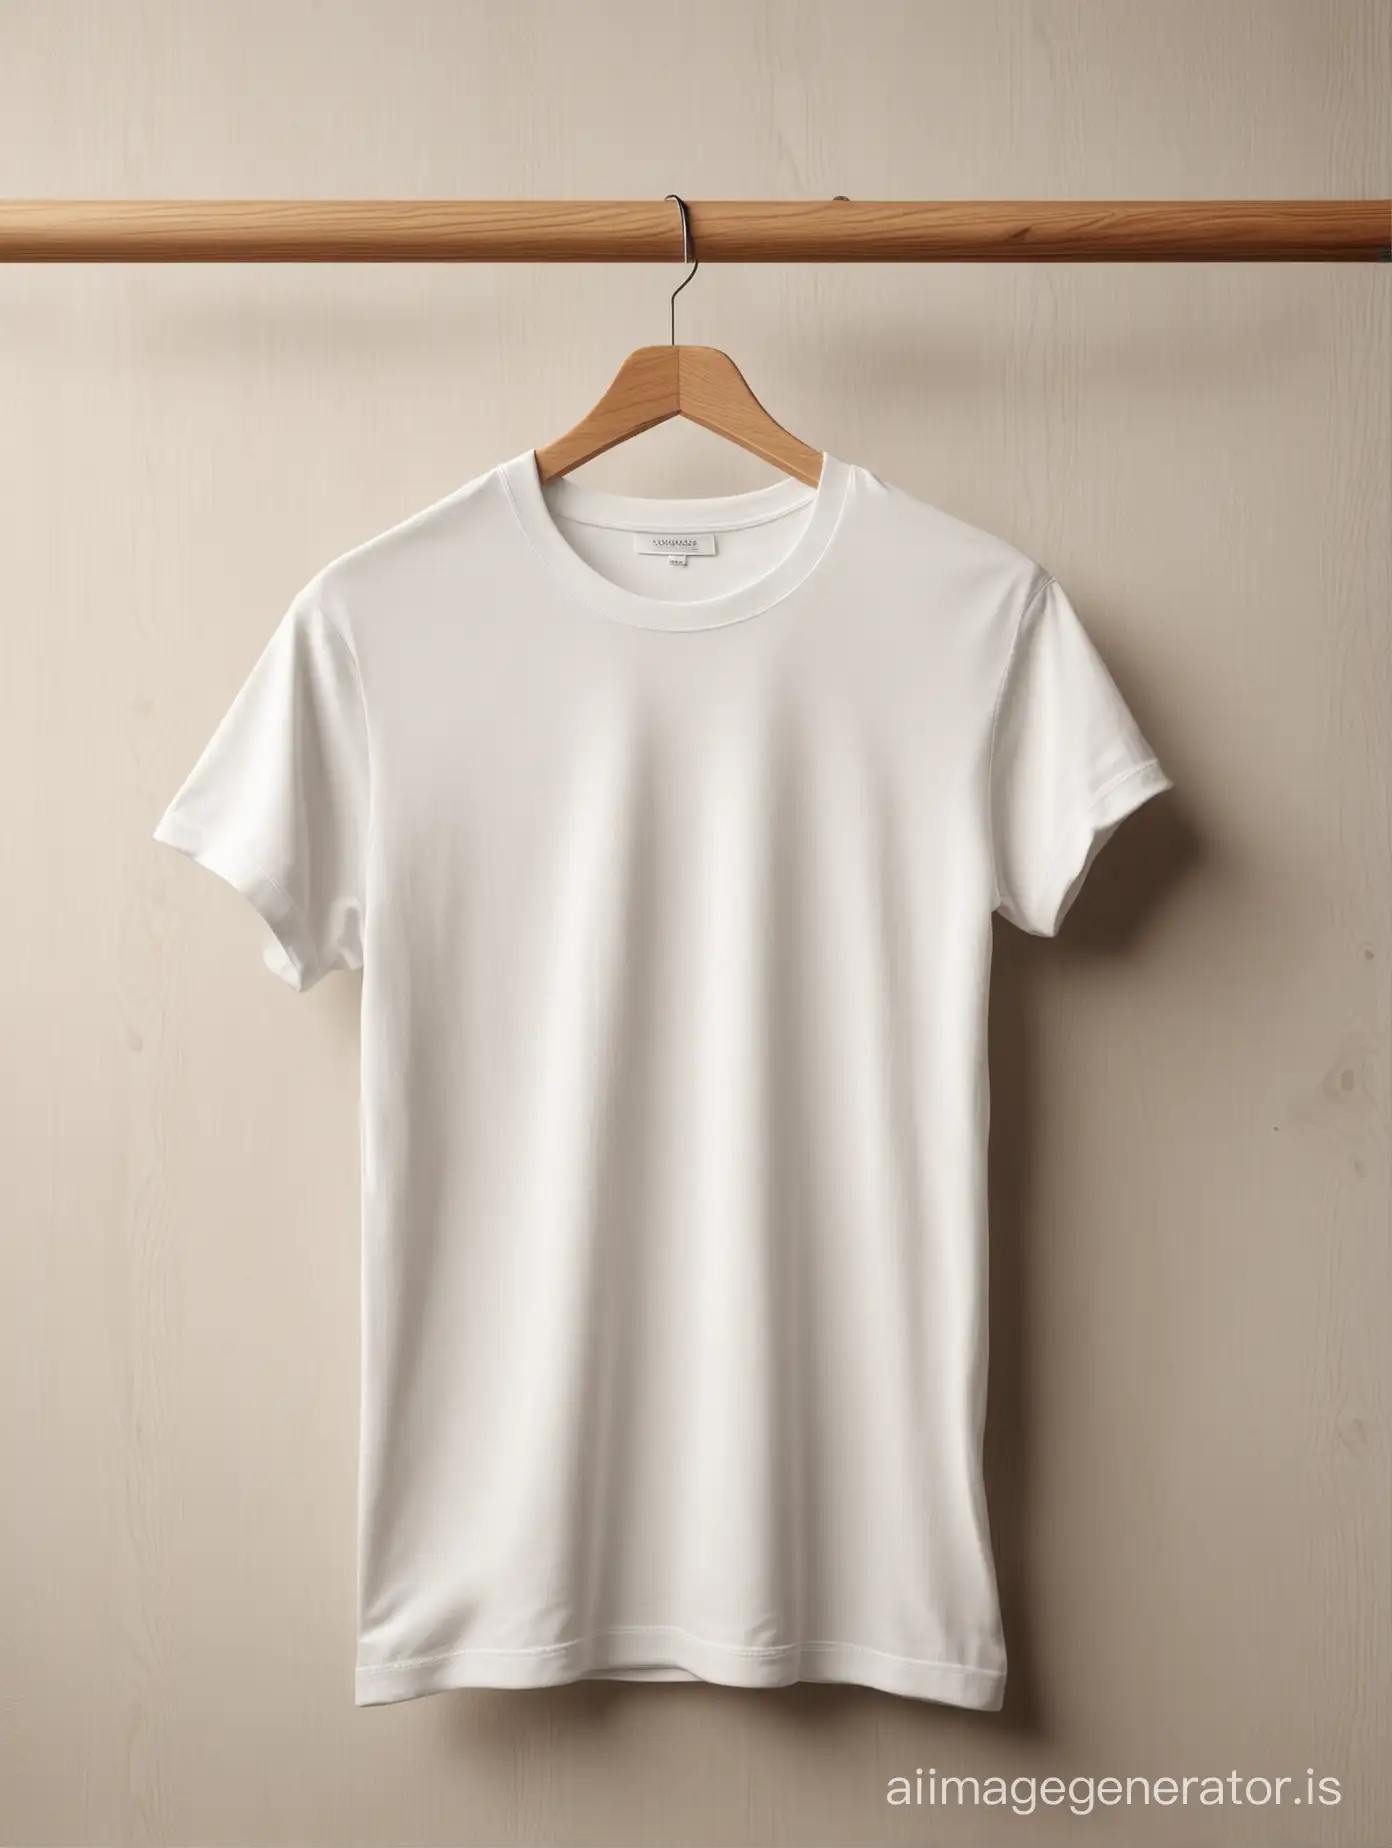 Super-realistic high resolution studio photo of a highly detailed cotton t shirt  in a rich, white color with a white label hanging on a wood hanger. Natural daylight streams in from the side, casting soft shadows that highlight the cotton texture of the cotton. Background is a seamless white paper with a subtle texture, creating a clean, luxurious feel. Overall aesthetic is high-end, minimalist, and inviting, reminiscent of a Zara brand catalog.